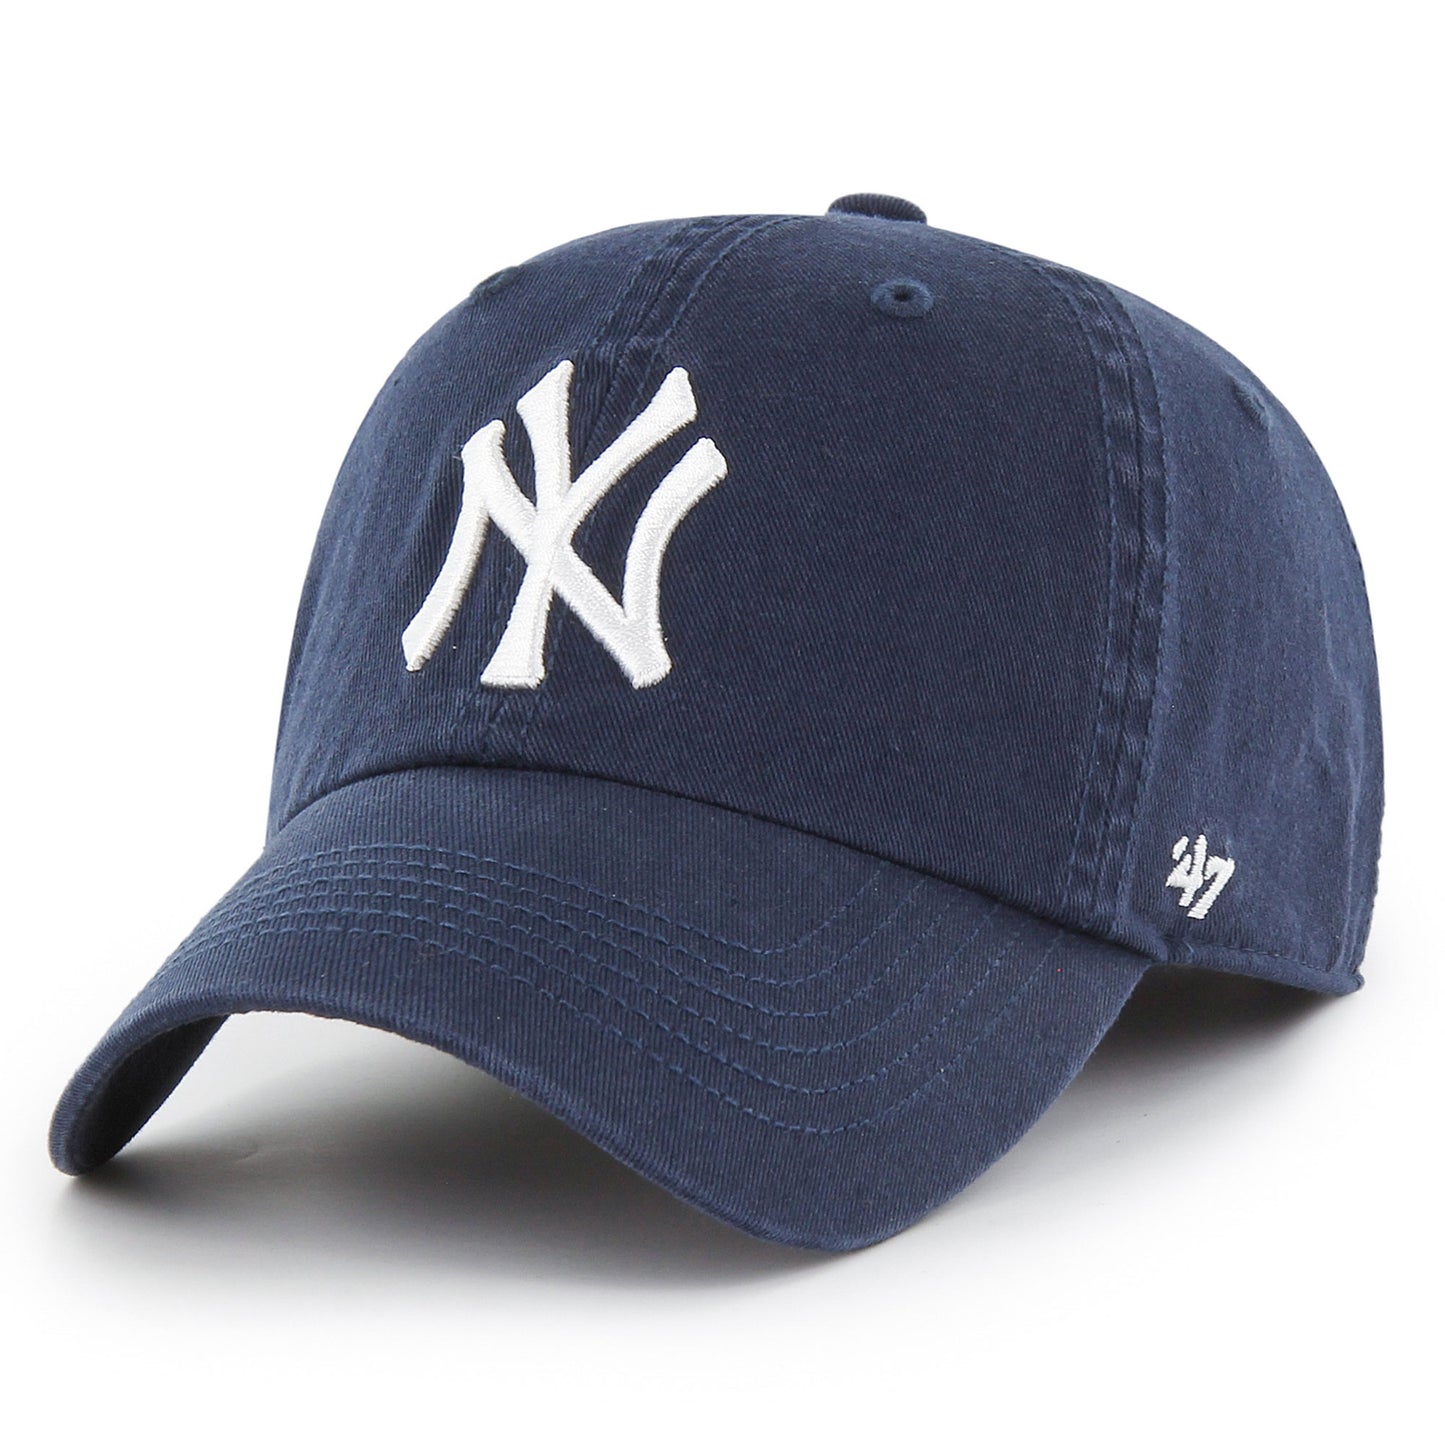 New York Yankees '47 Franchise Logo Fitted Hat - Navy